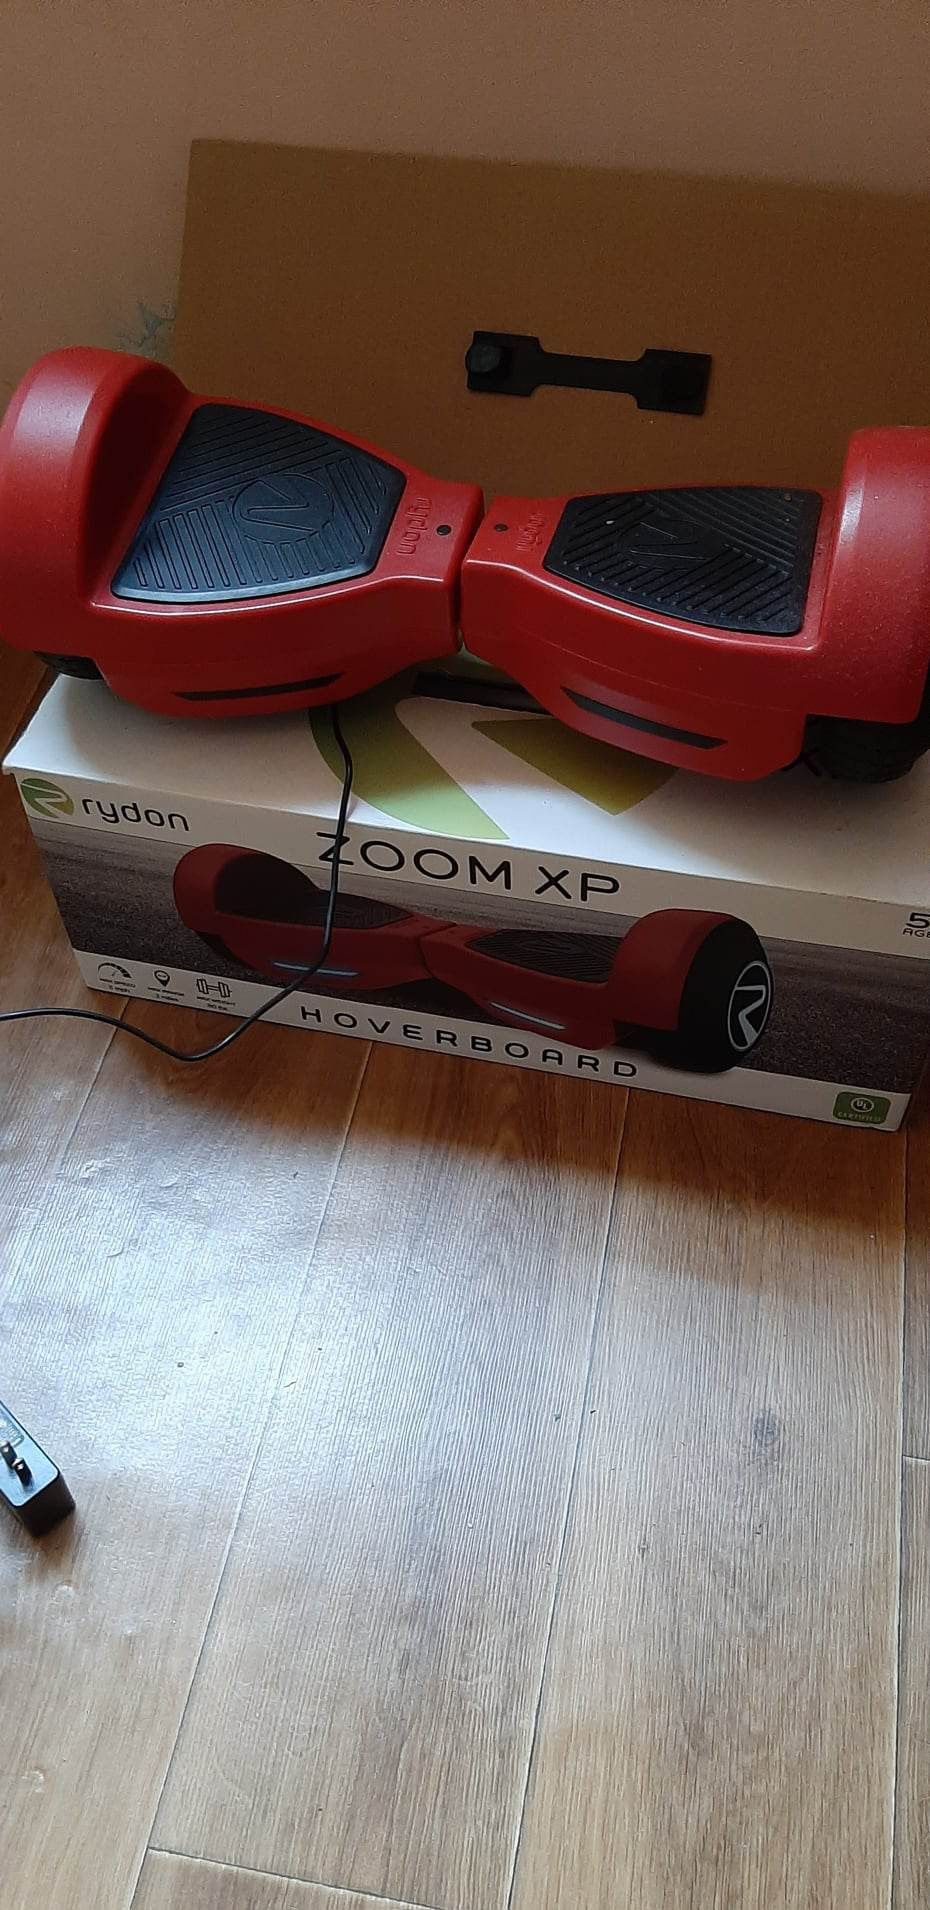 Hoverboard zoom xp